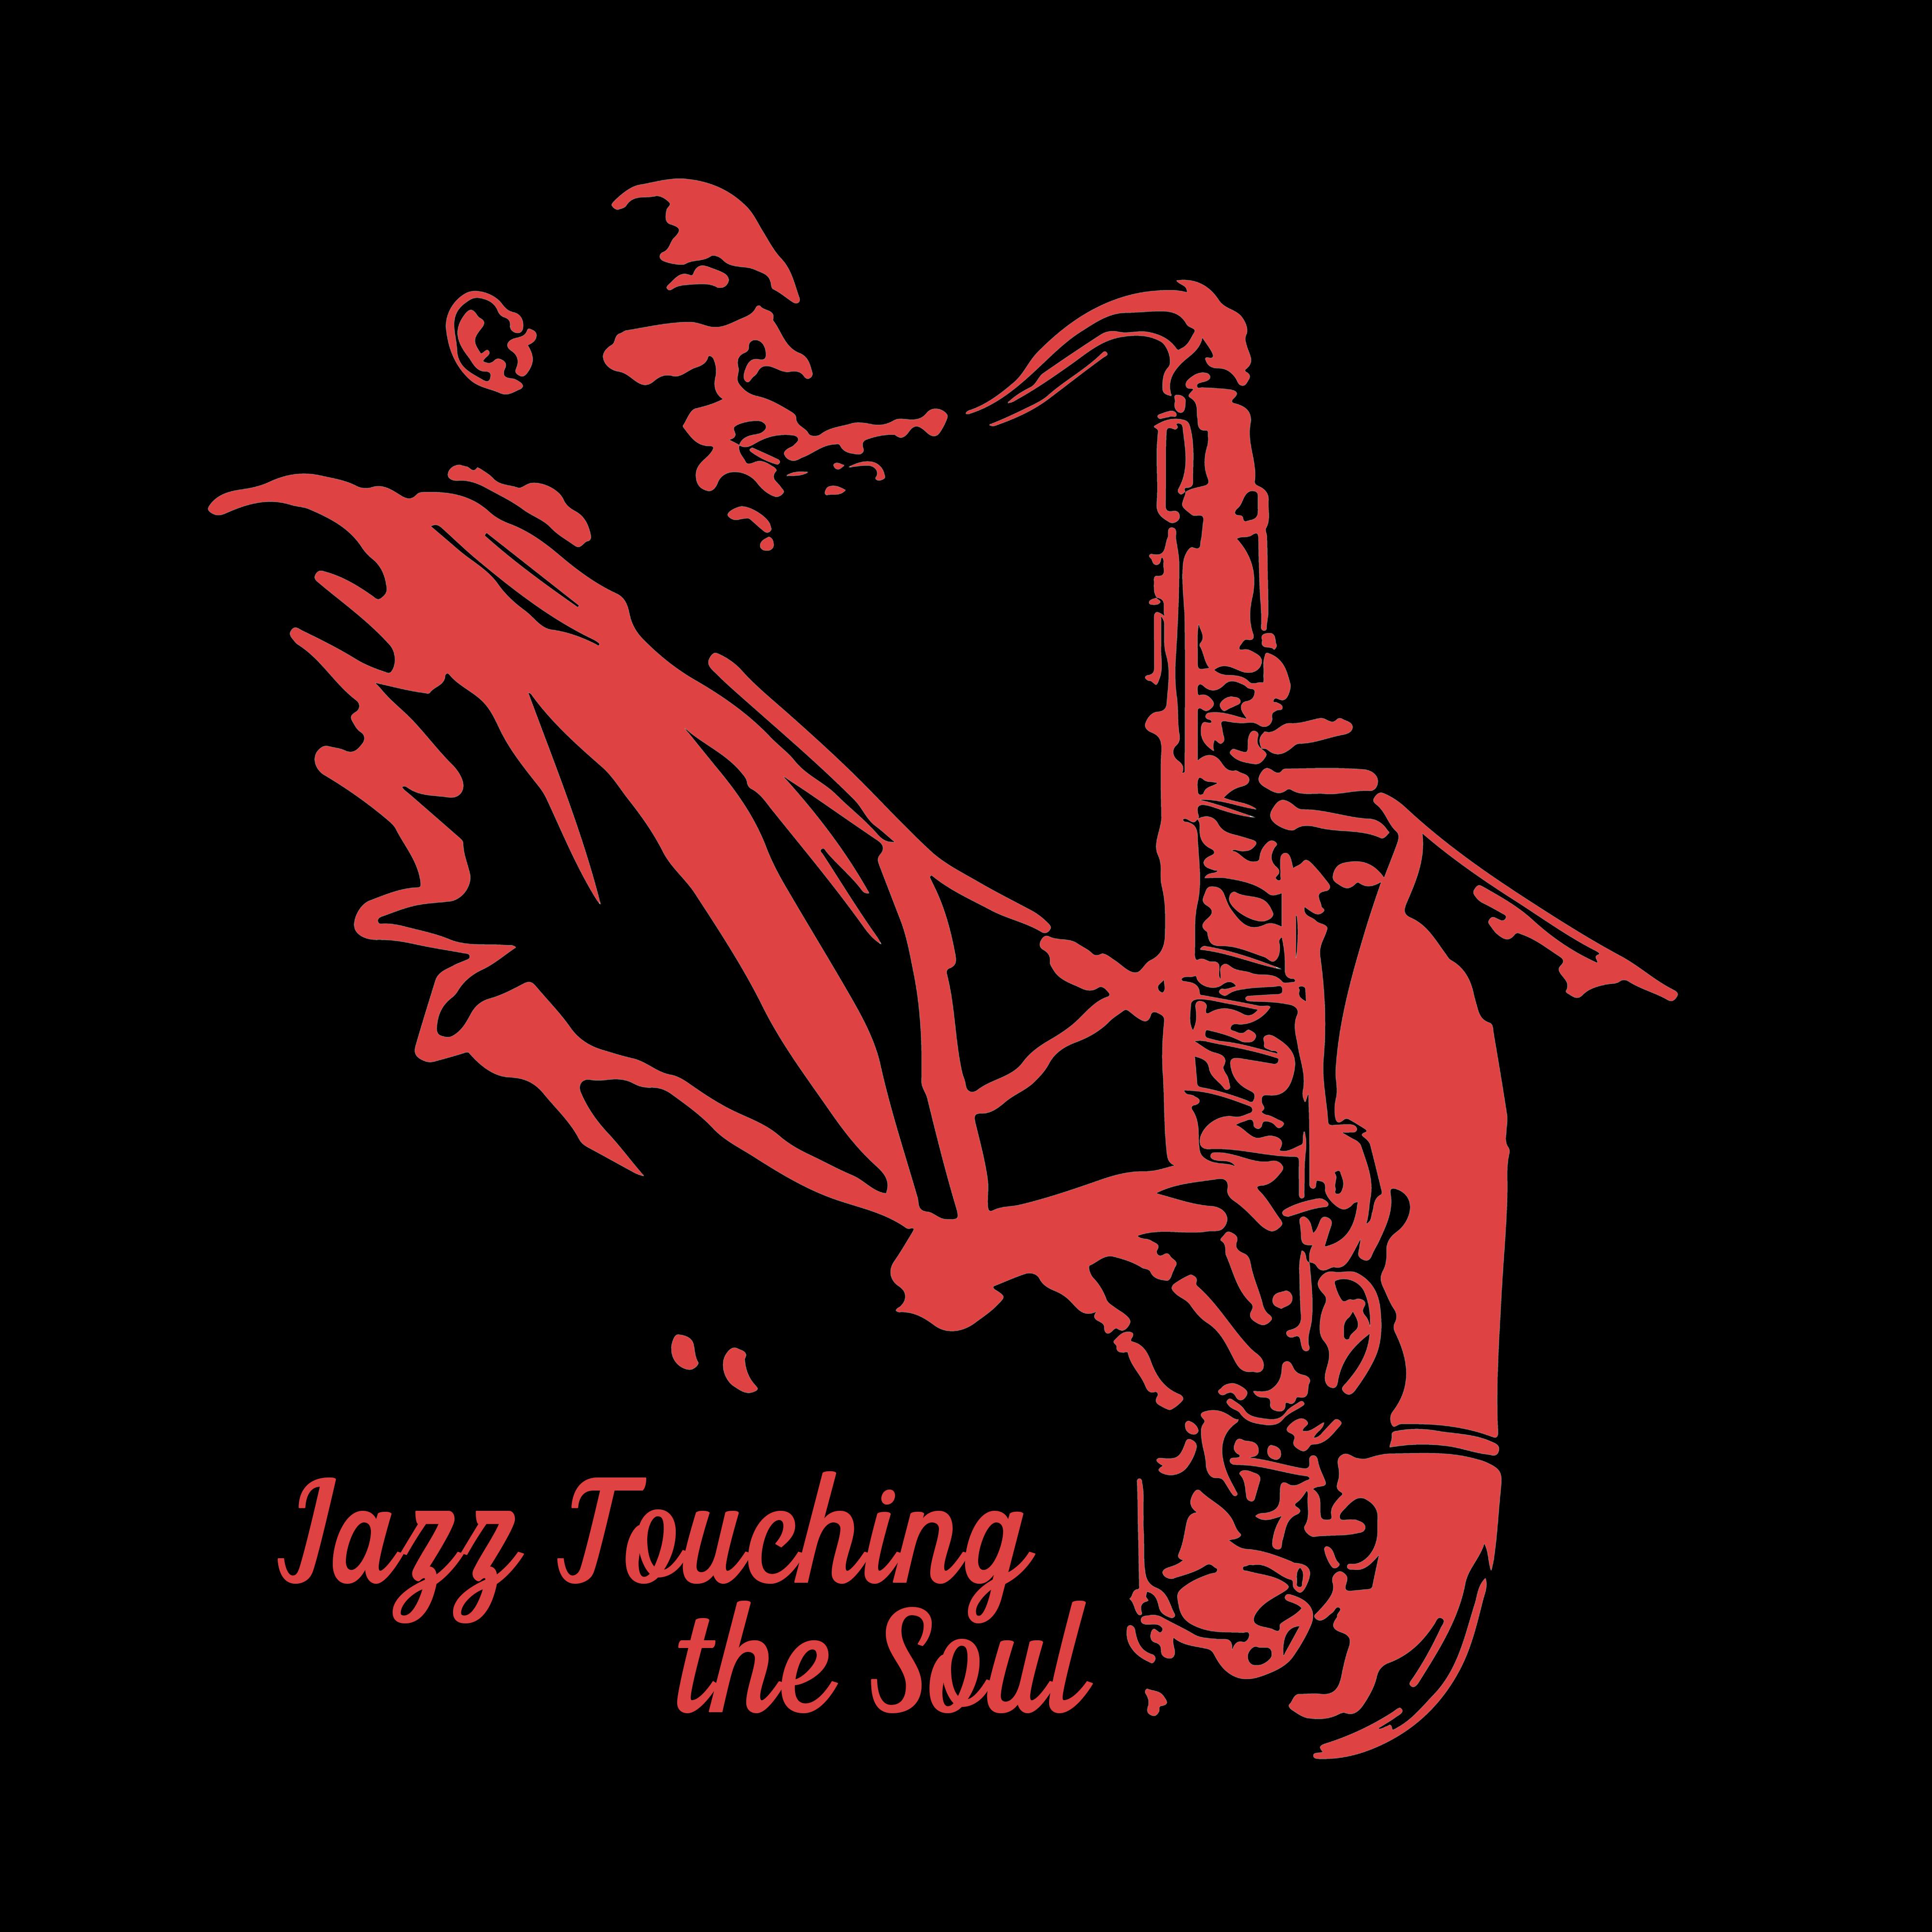 Jazz Touching the Soul: Smooth Jazz Fresh 2019 Rhythms, Vintage Music for Total Calming Down, Chilling Out, Meeting with Friends